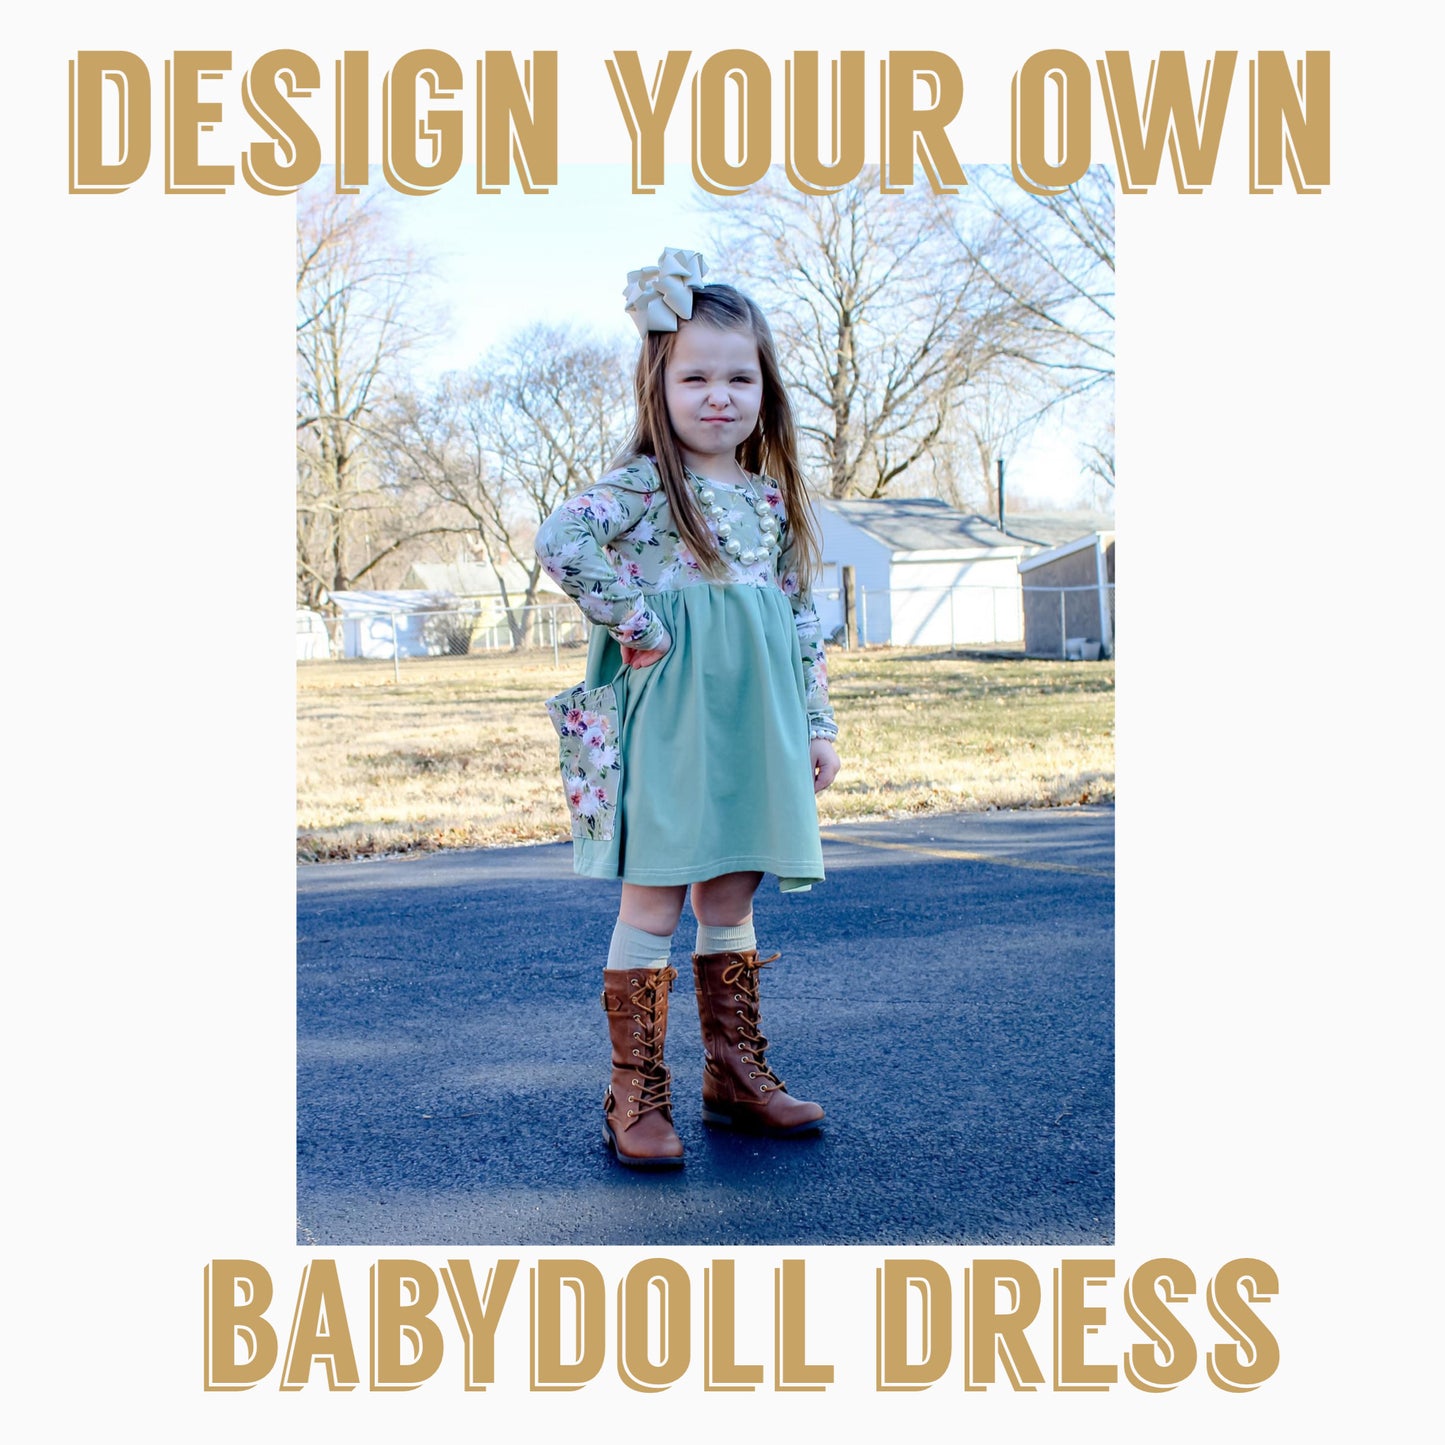 Design your own| Baby Doll Pocket Dress